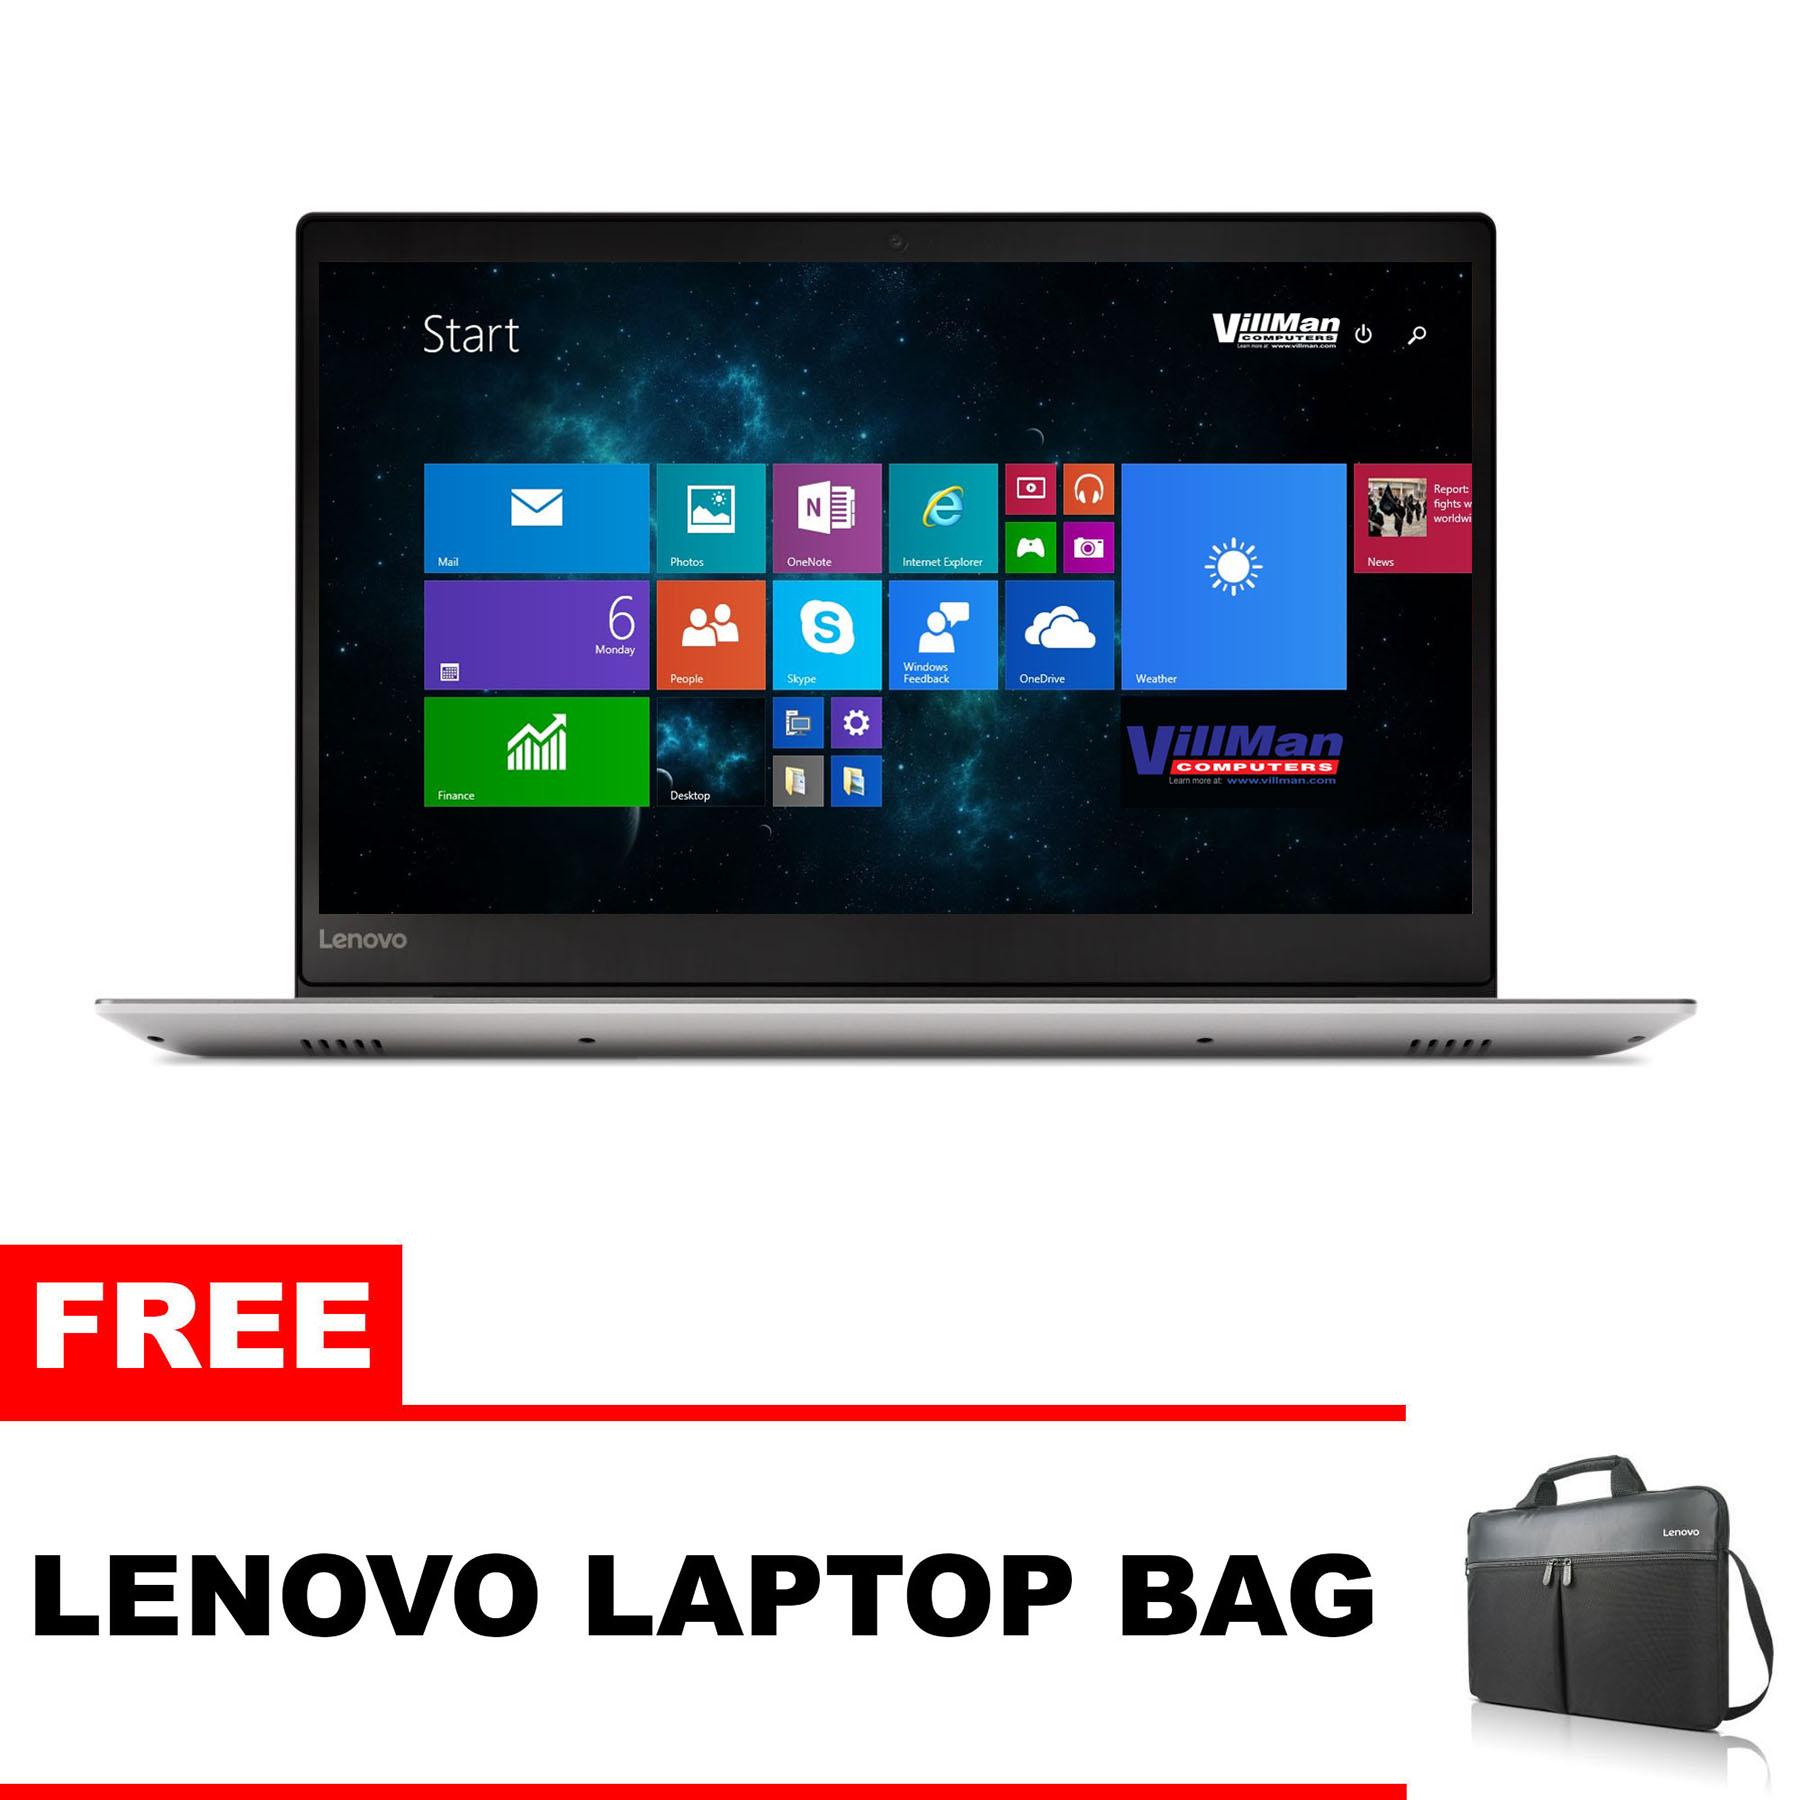 Lenovo g550 drivers free download for windows 7